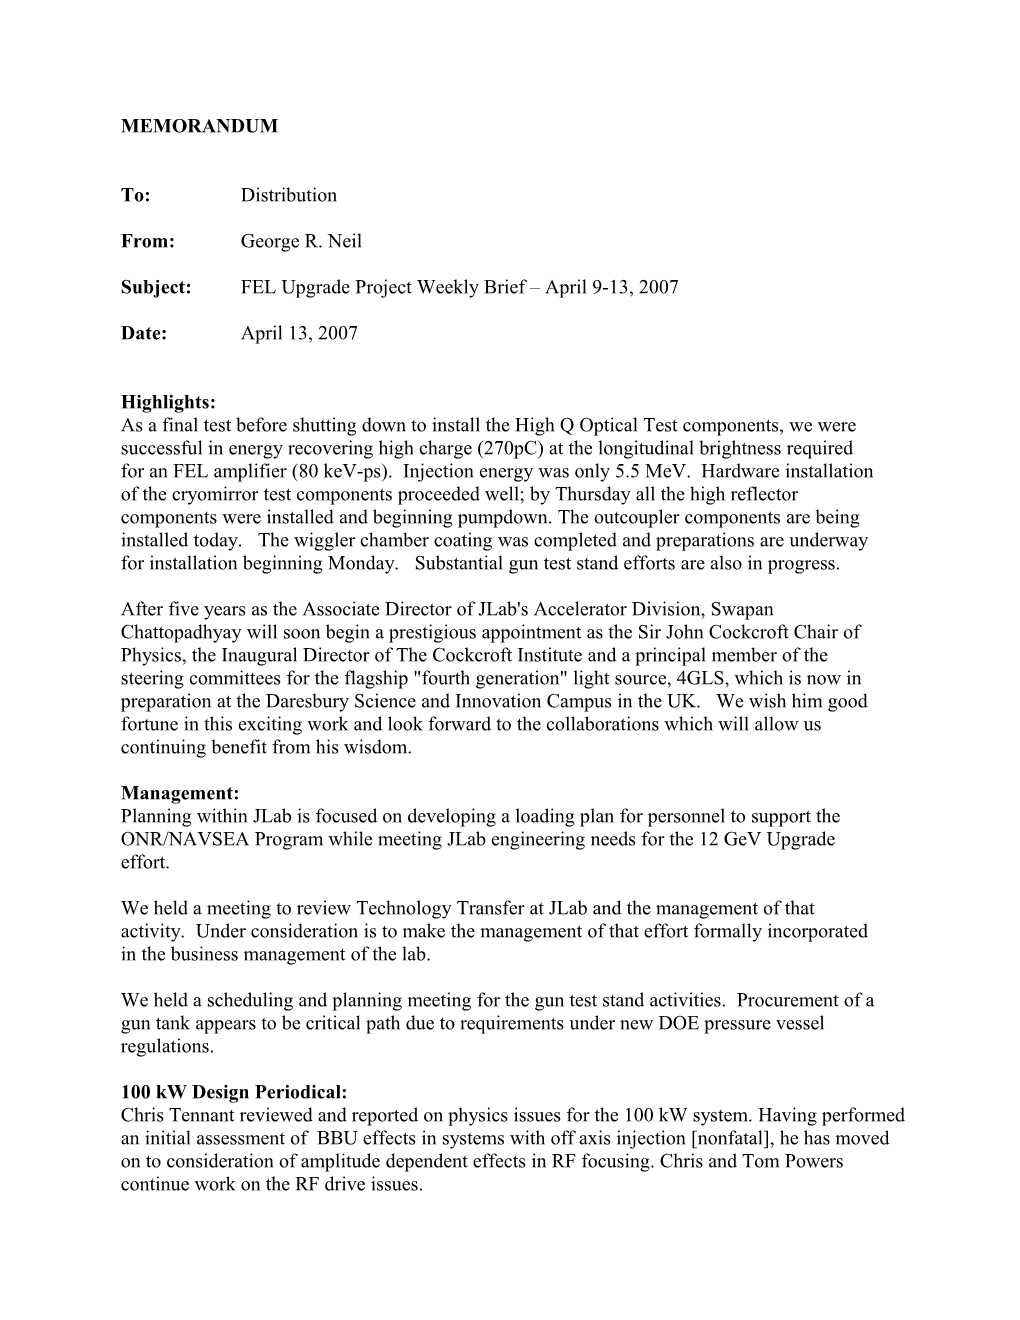 Subject:FEL Upgrade Project Weekly Brief April 9-13, 2007